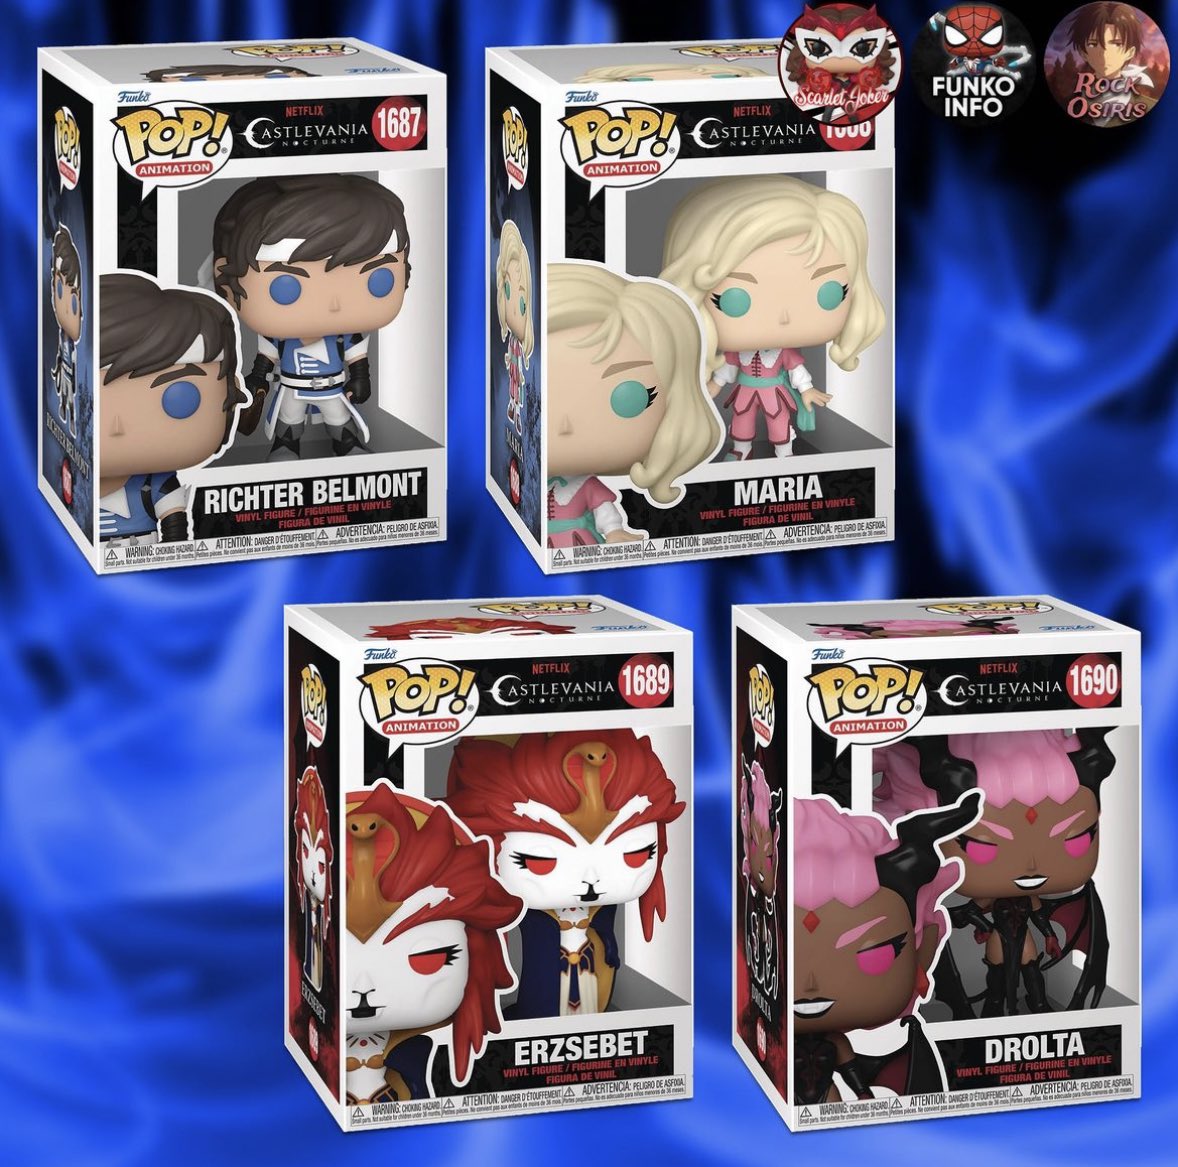 First look! The new Castlevania Nocturne Funko POPs! Going live at the links below this week ~ Thanks @funkoinfo_ ~
EE ~ fnkpp.com/EE
Amzn ~ fnkpp.com/Amzn
MHS ~ fnkpp.com/MH
#Ad #CastlevaniaNocturne #FPN #FunkoPOPNews #Funko #POP #POPVinyl